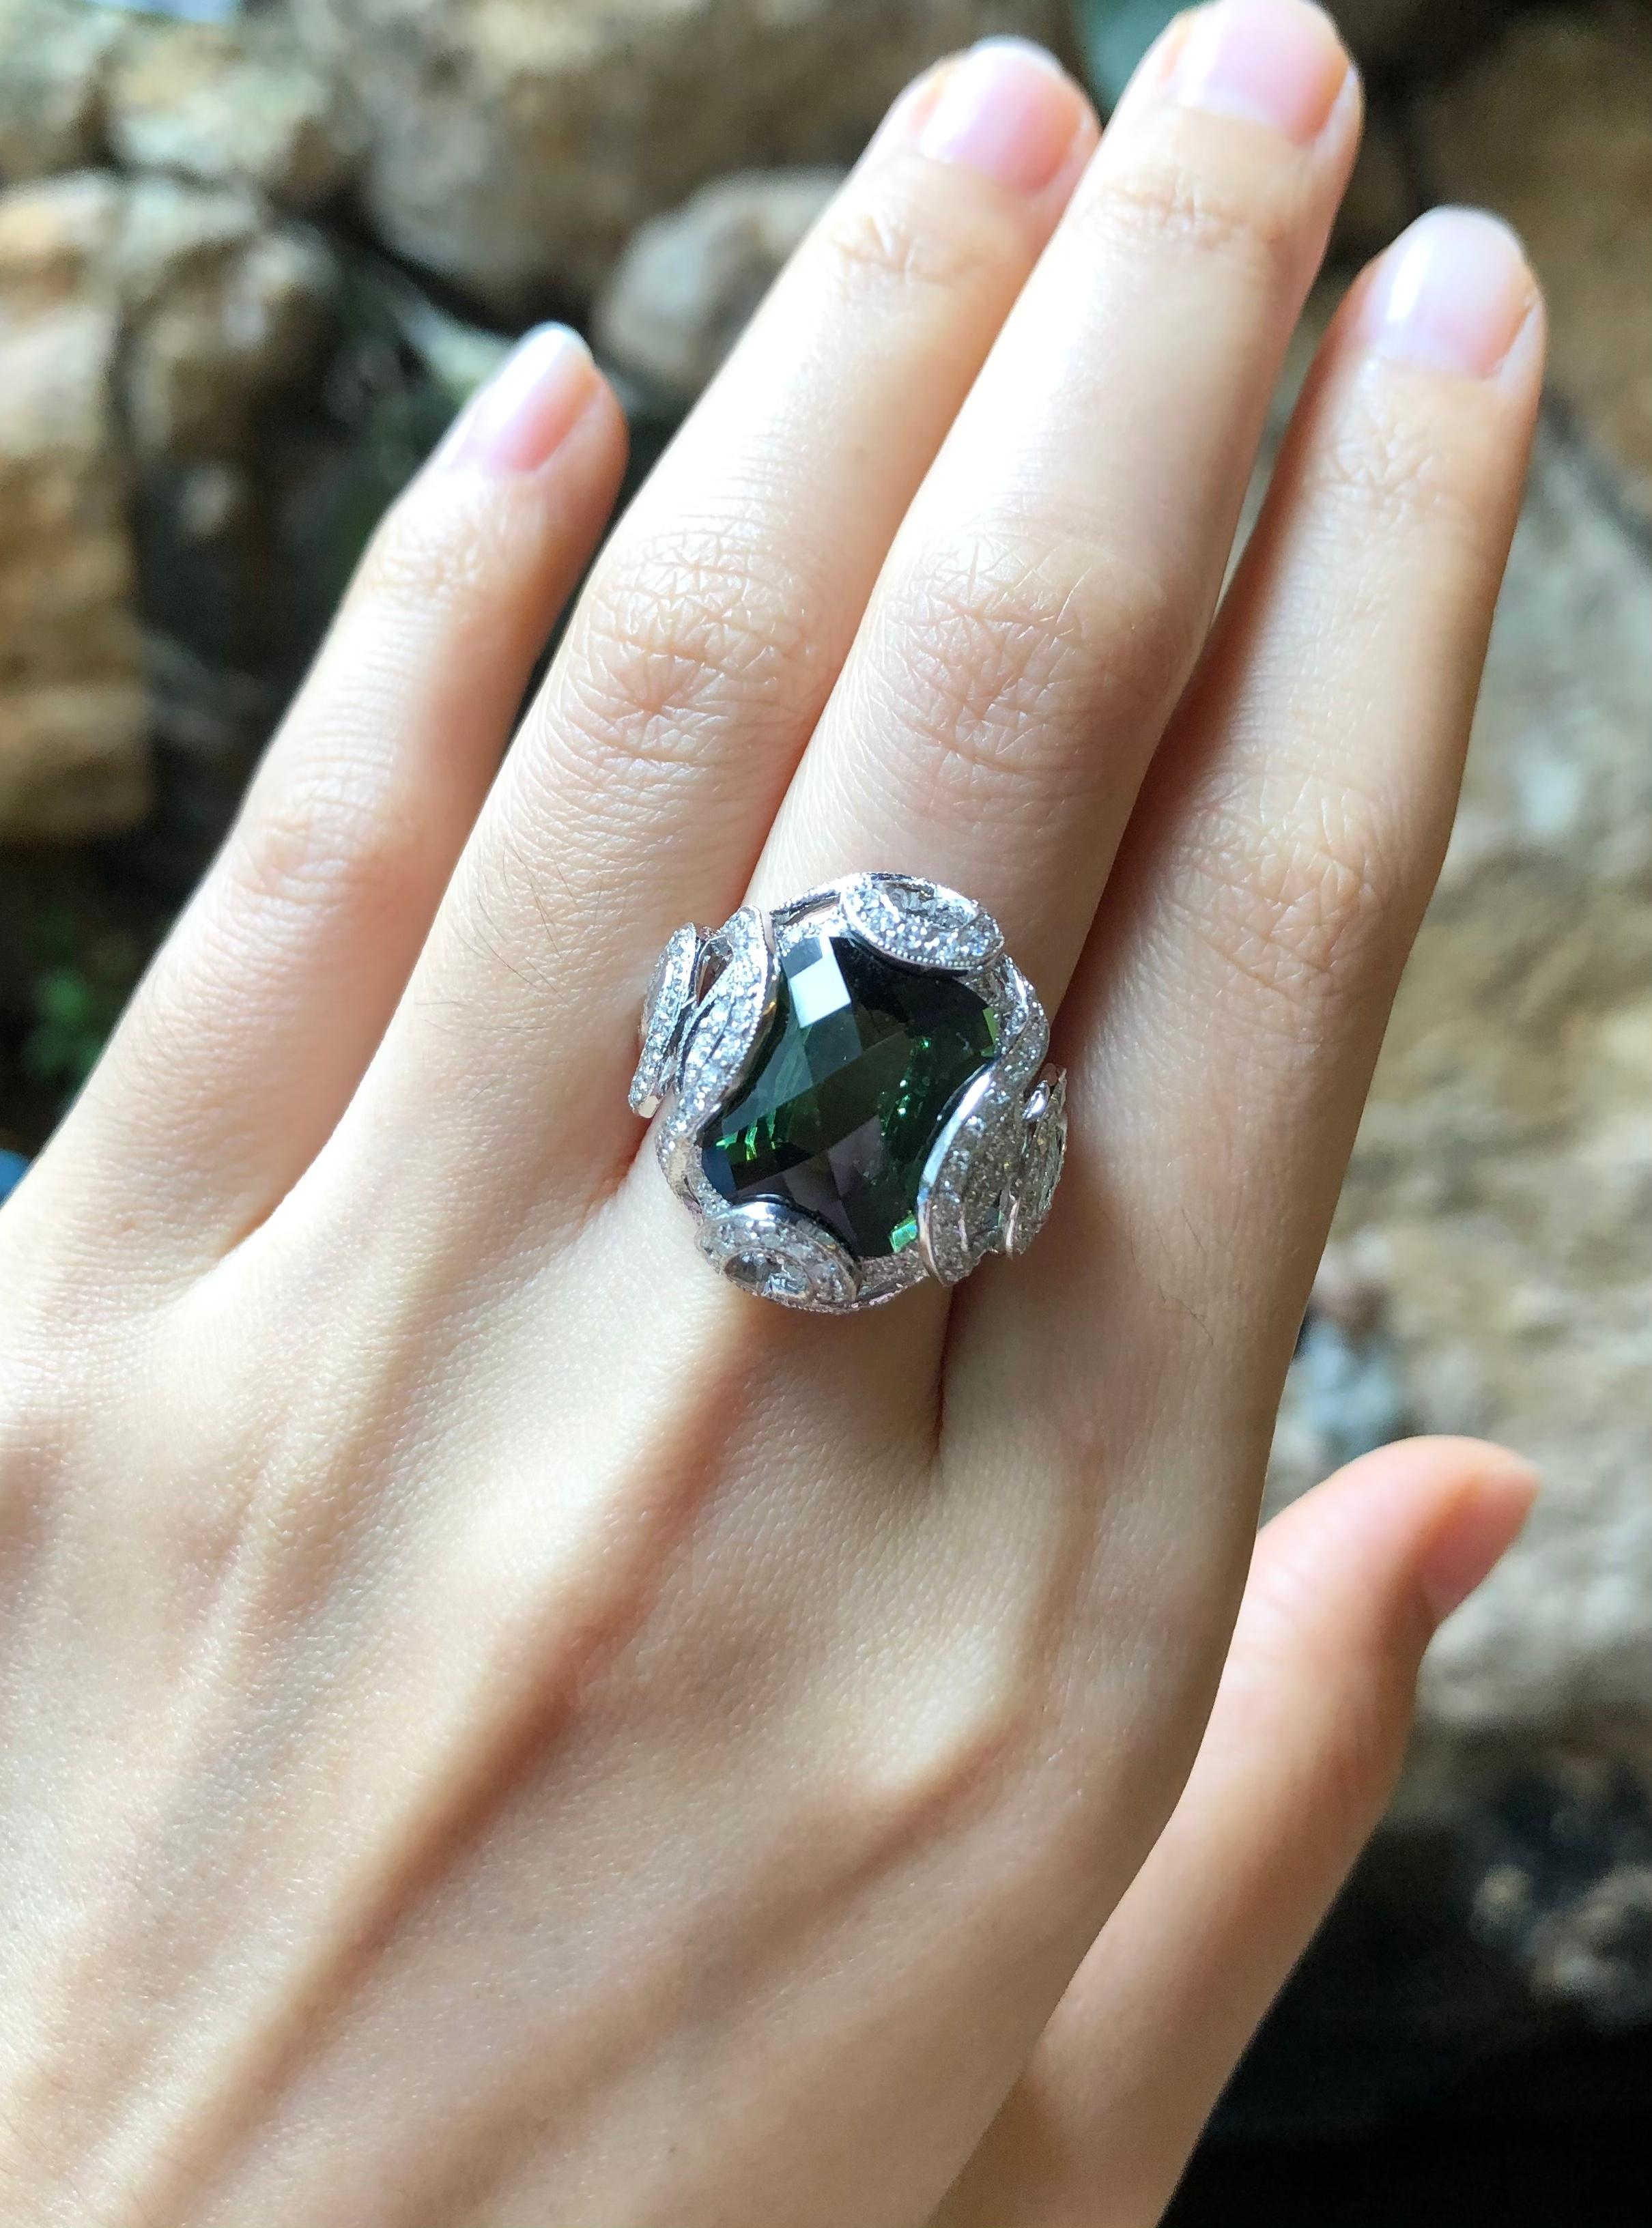 Green Tourmaline 9.47 carats with Diamond 1.17 carats Ring set in 18 Karat White Gold Settings

Width:  1.8 cm 
Length:  2.1 cm
Ring Size: 52
Total Weight: 10.82 grams

